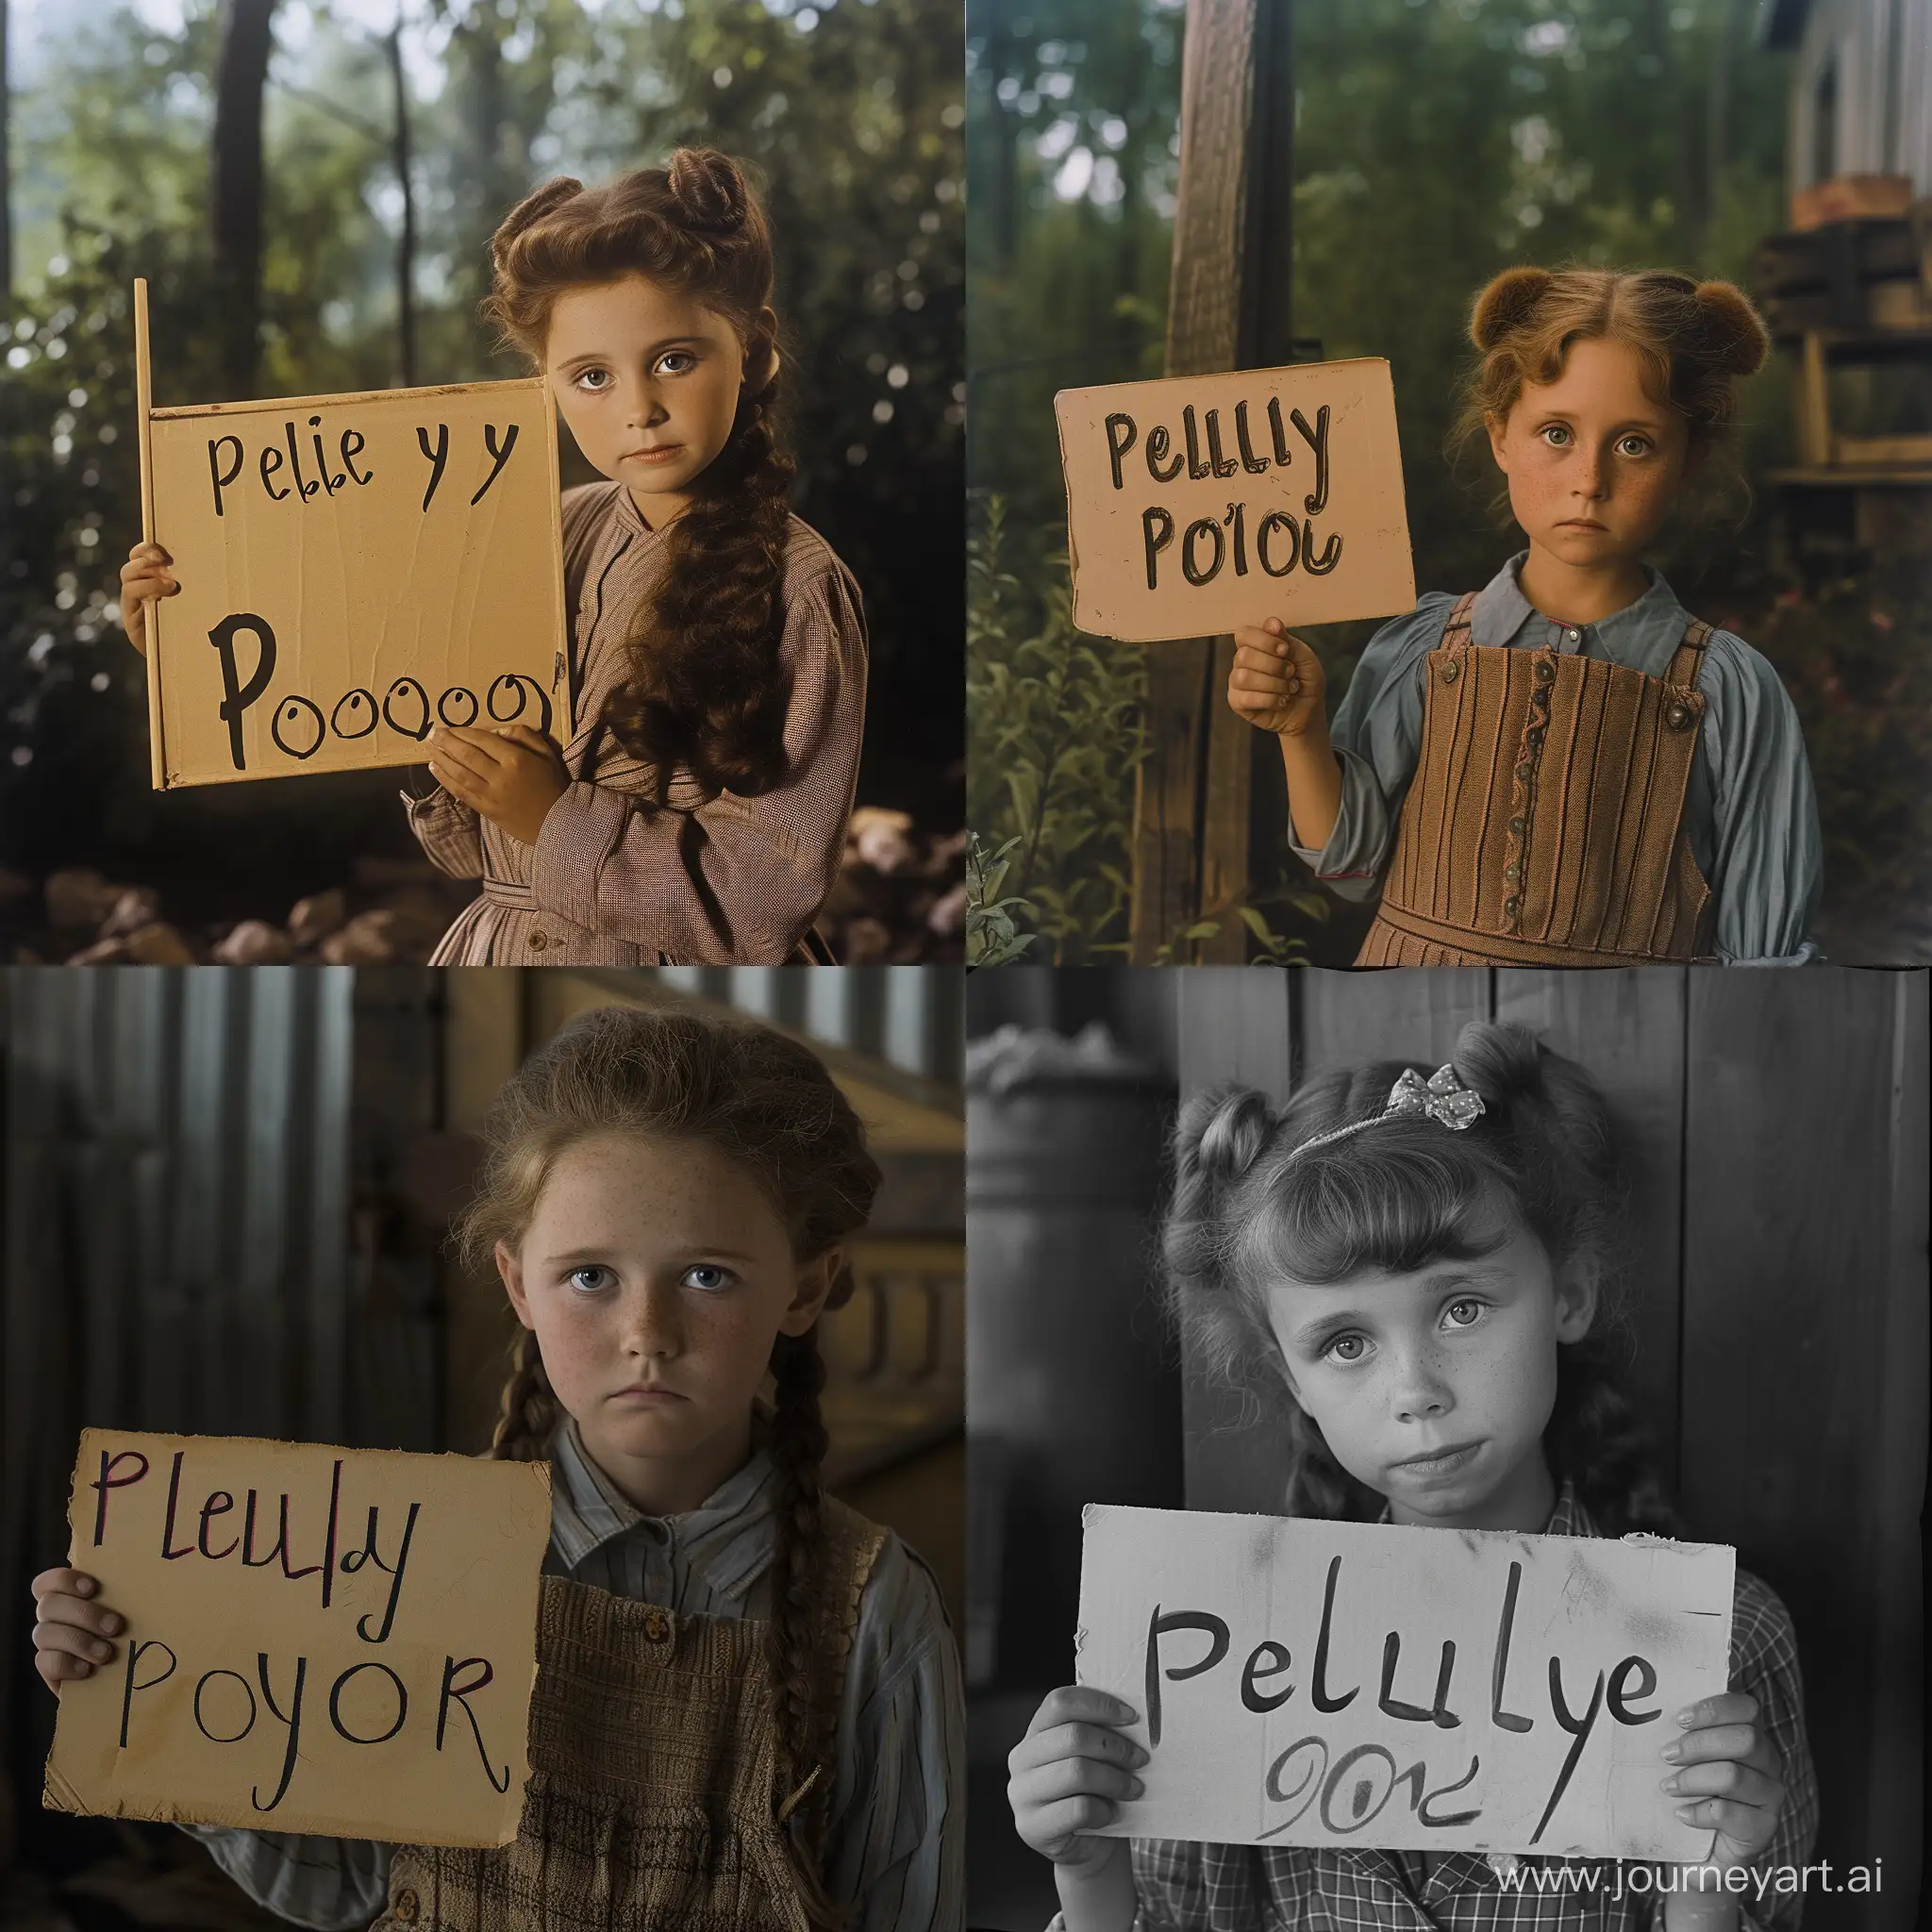 Madelyn Cline holding a sign that says "Please Pookie"

